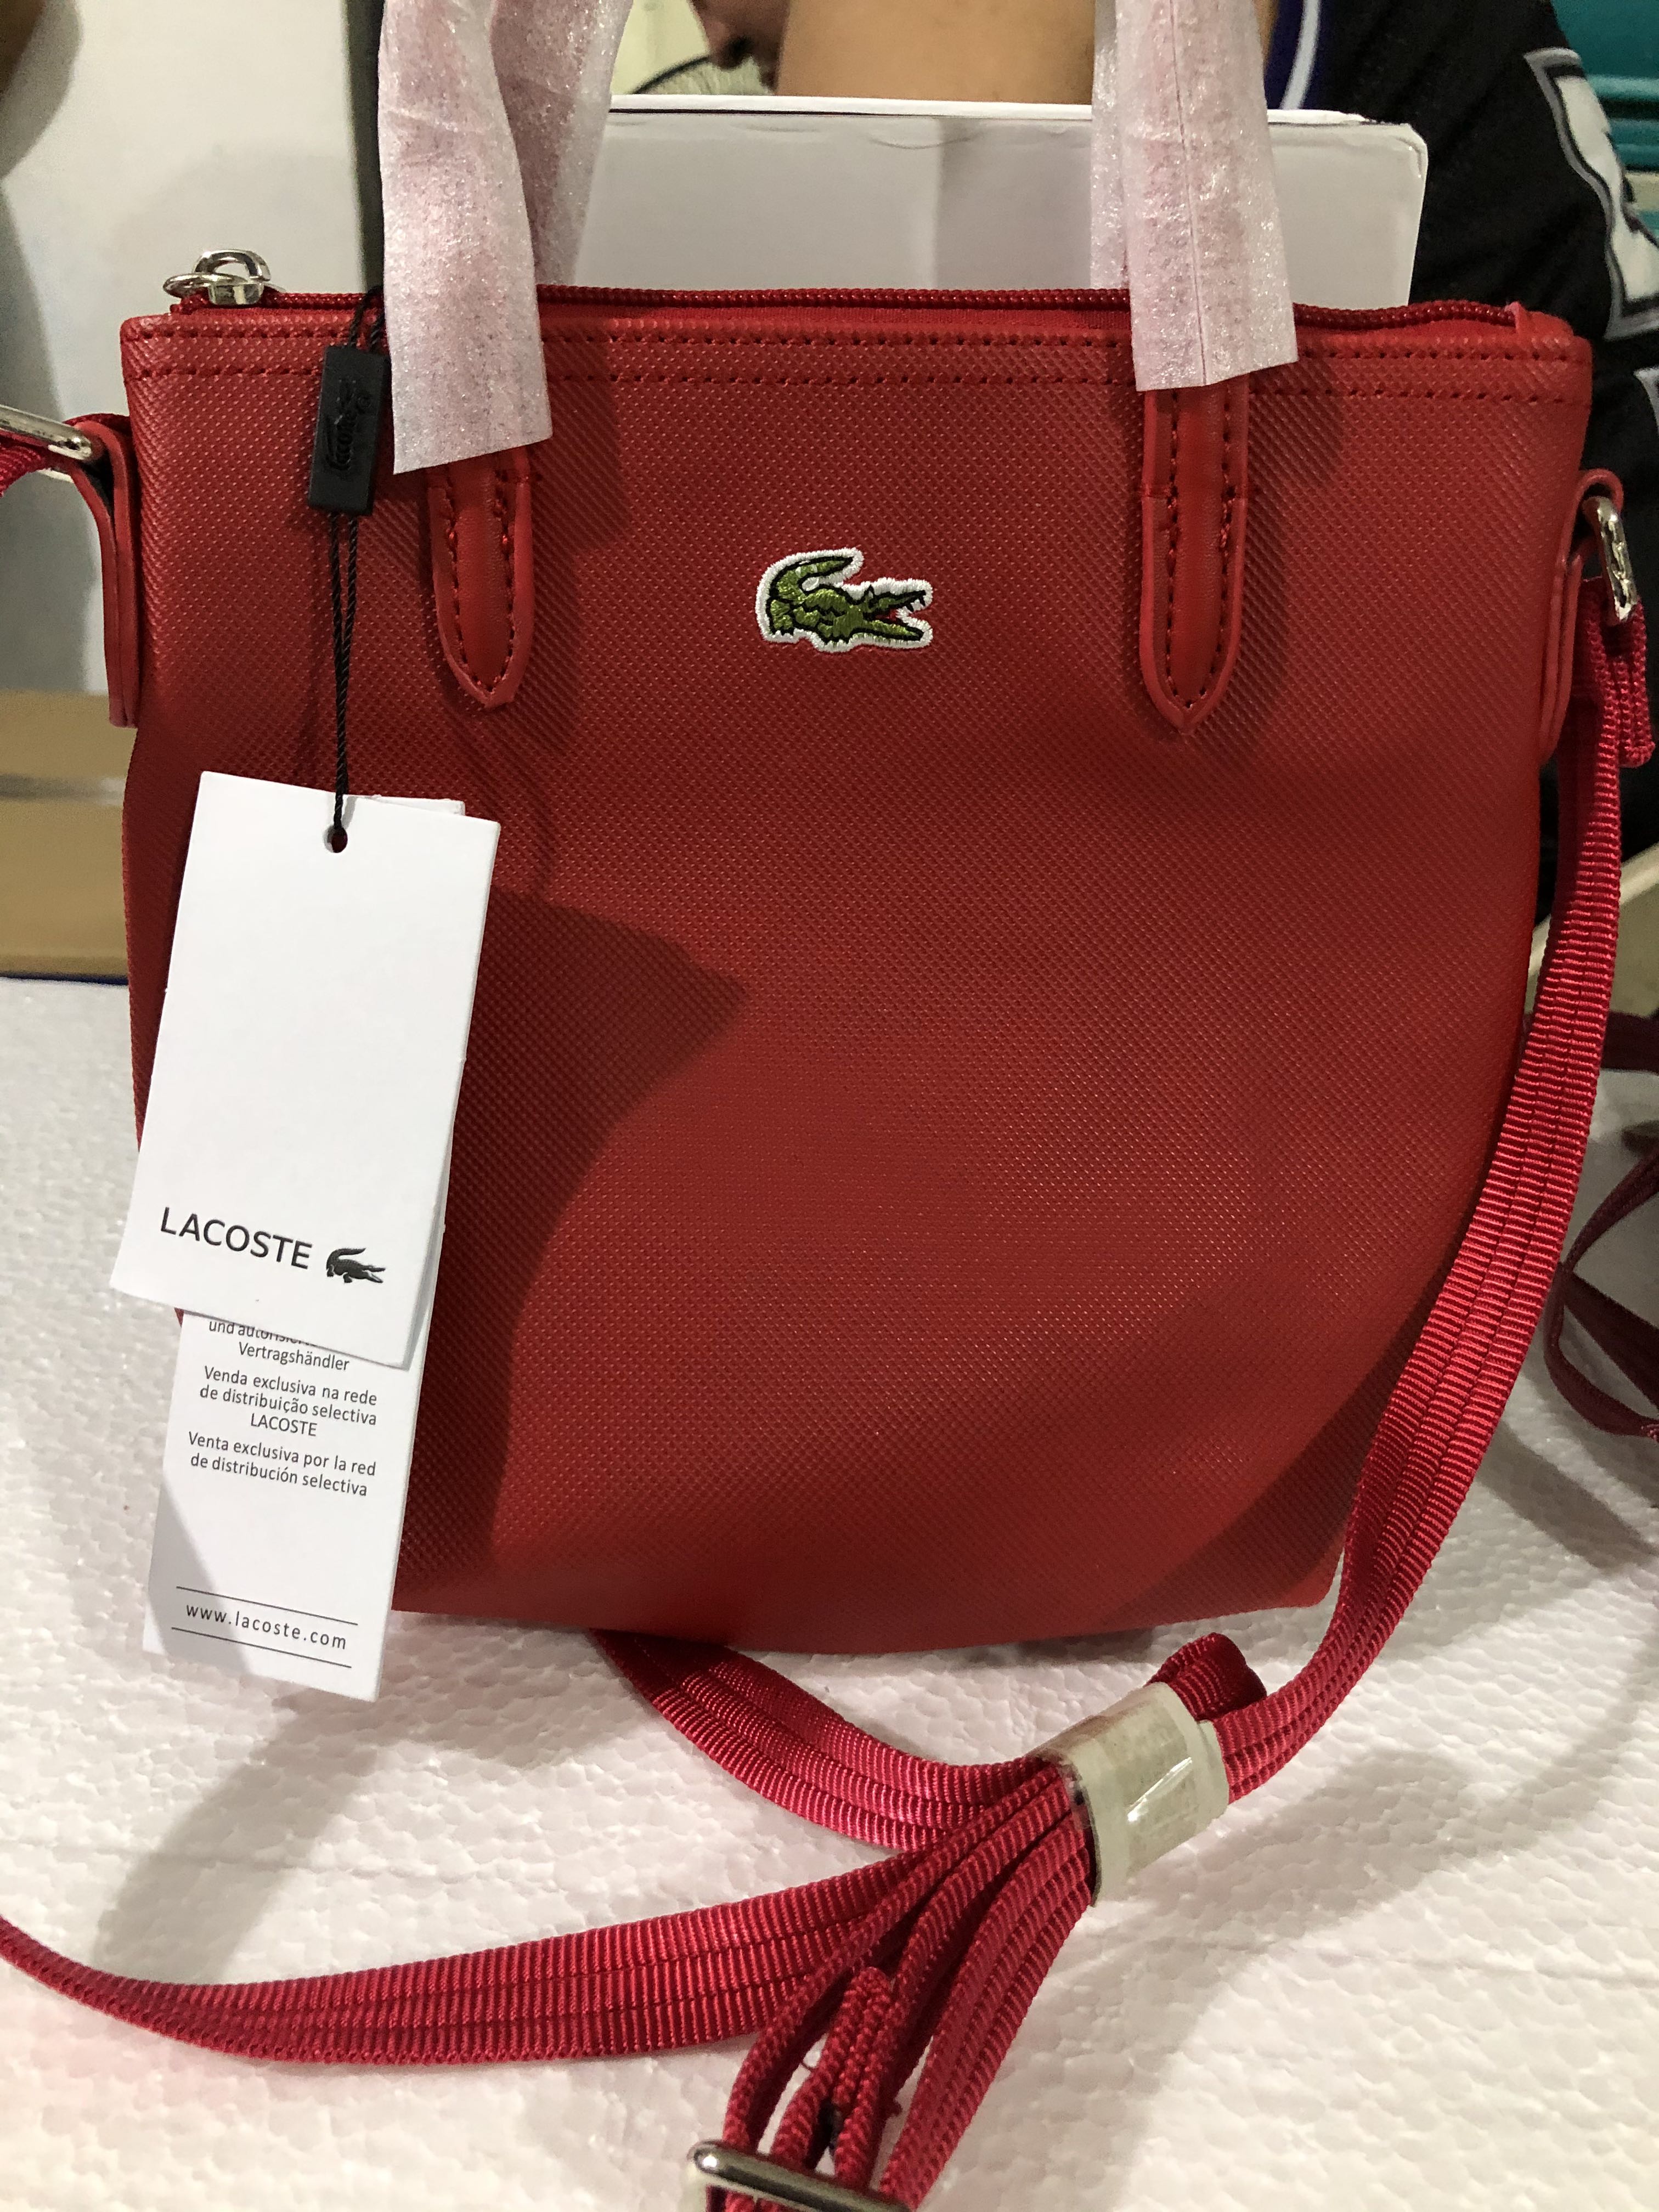 Lacoste sling bag On hand \u0026 ready to 